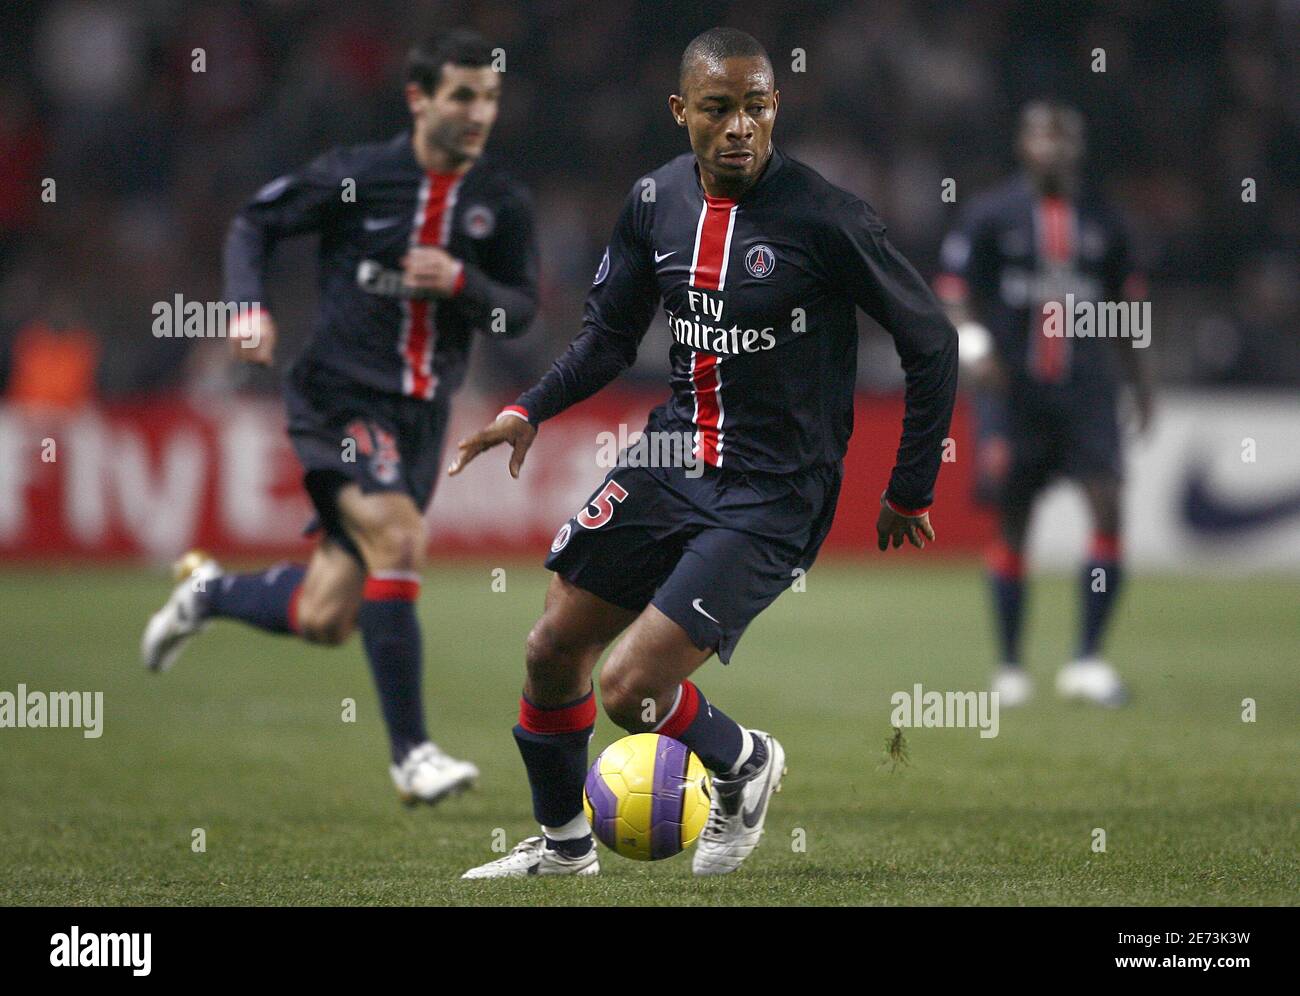 Psg's Bonaventure Kalou during the UEFA Cup second knockout round first leg game soccer match PSG vs Benfica, at the Parc des Princes stadium in Paris, France, on March 8, 2007. PSG won 2-1. Photo by Christian Liewig/ABACAPRESS.COM Stock Photo